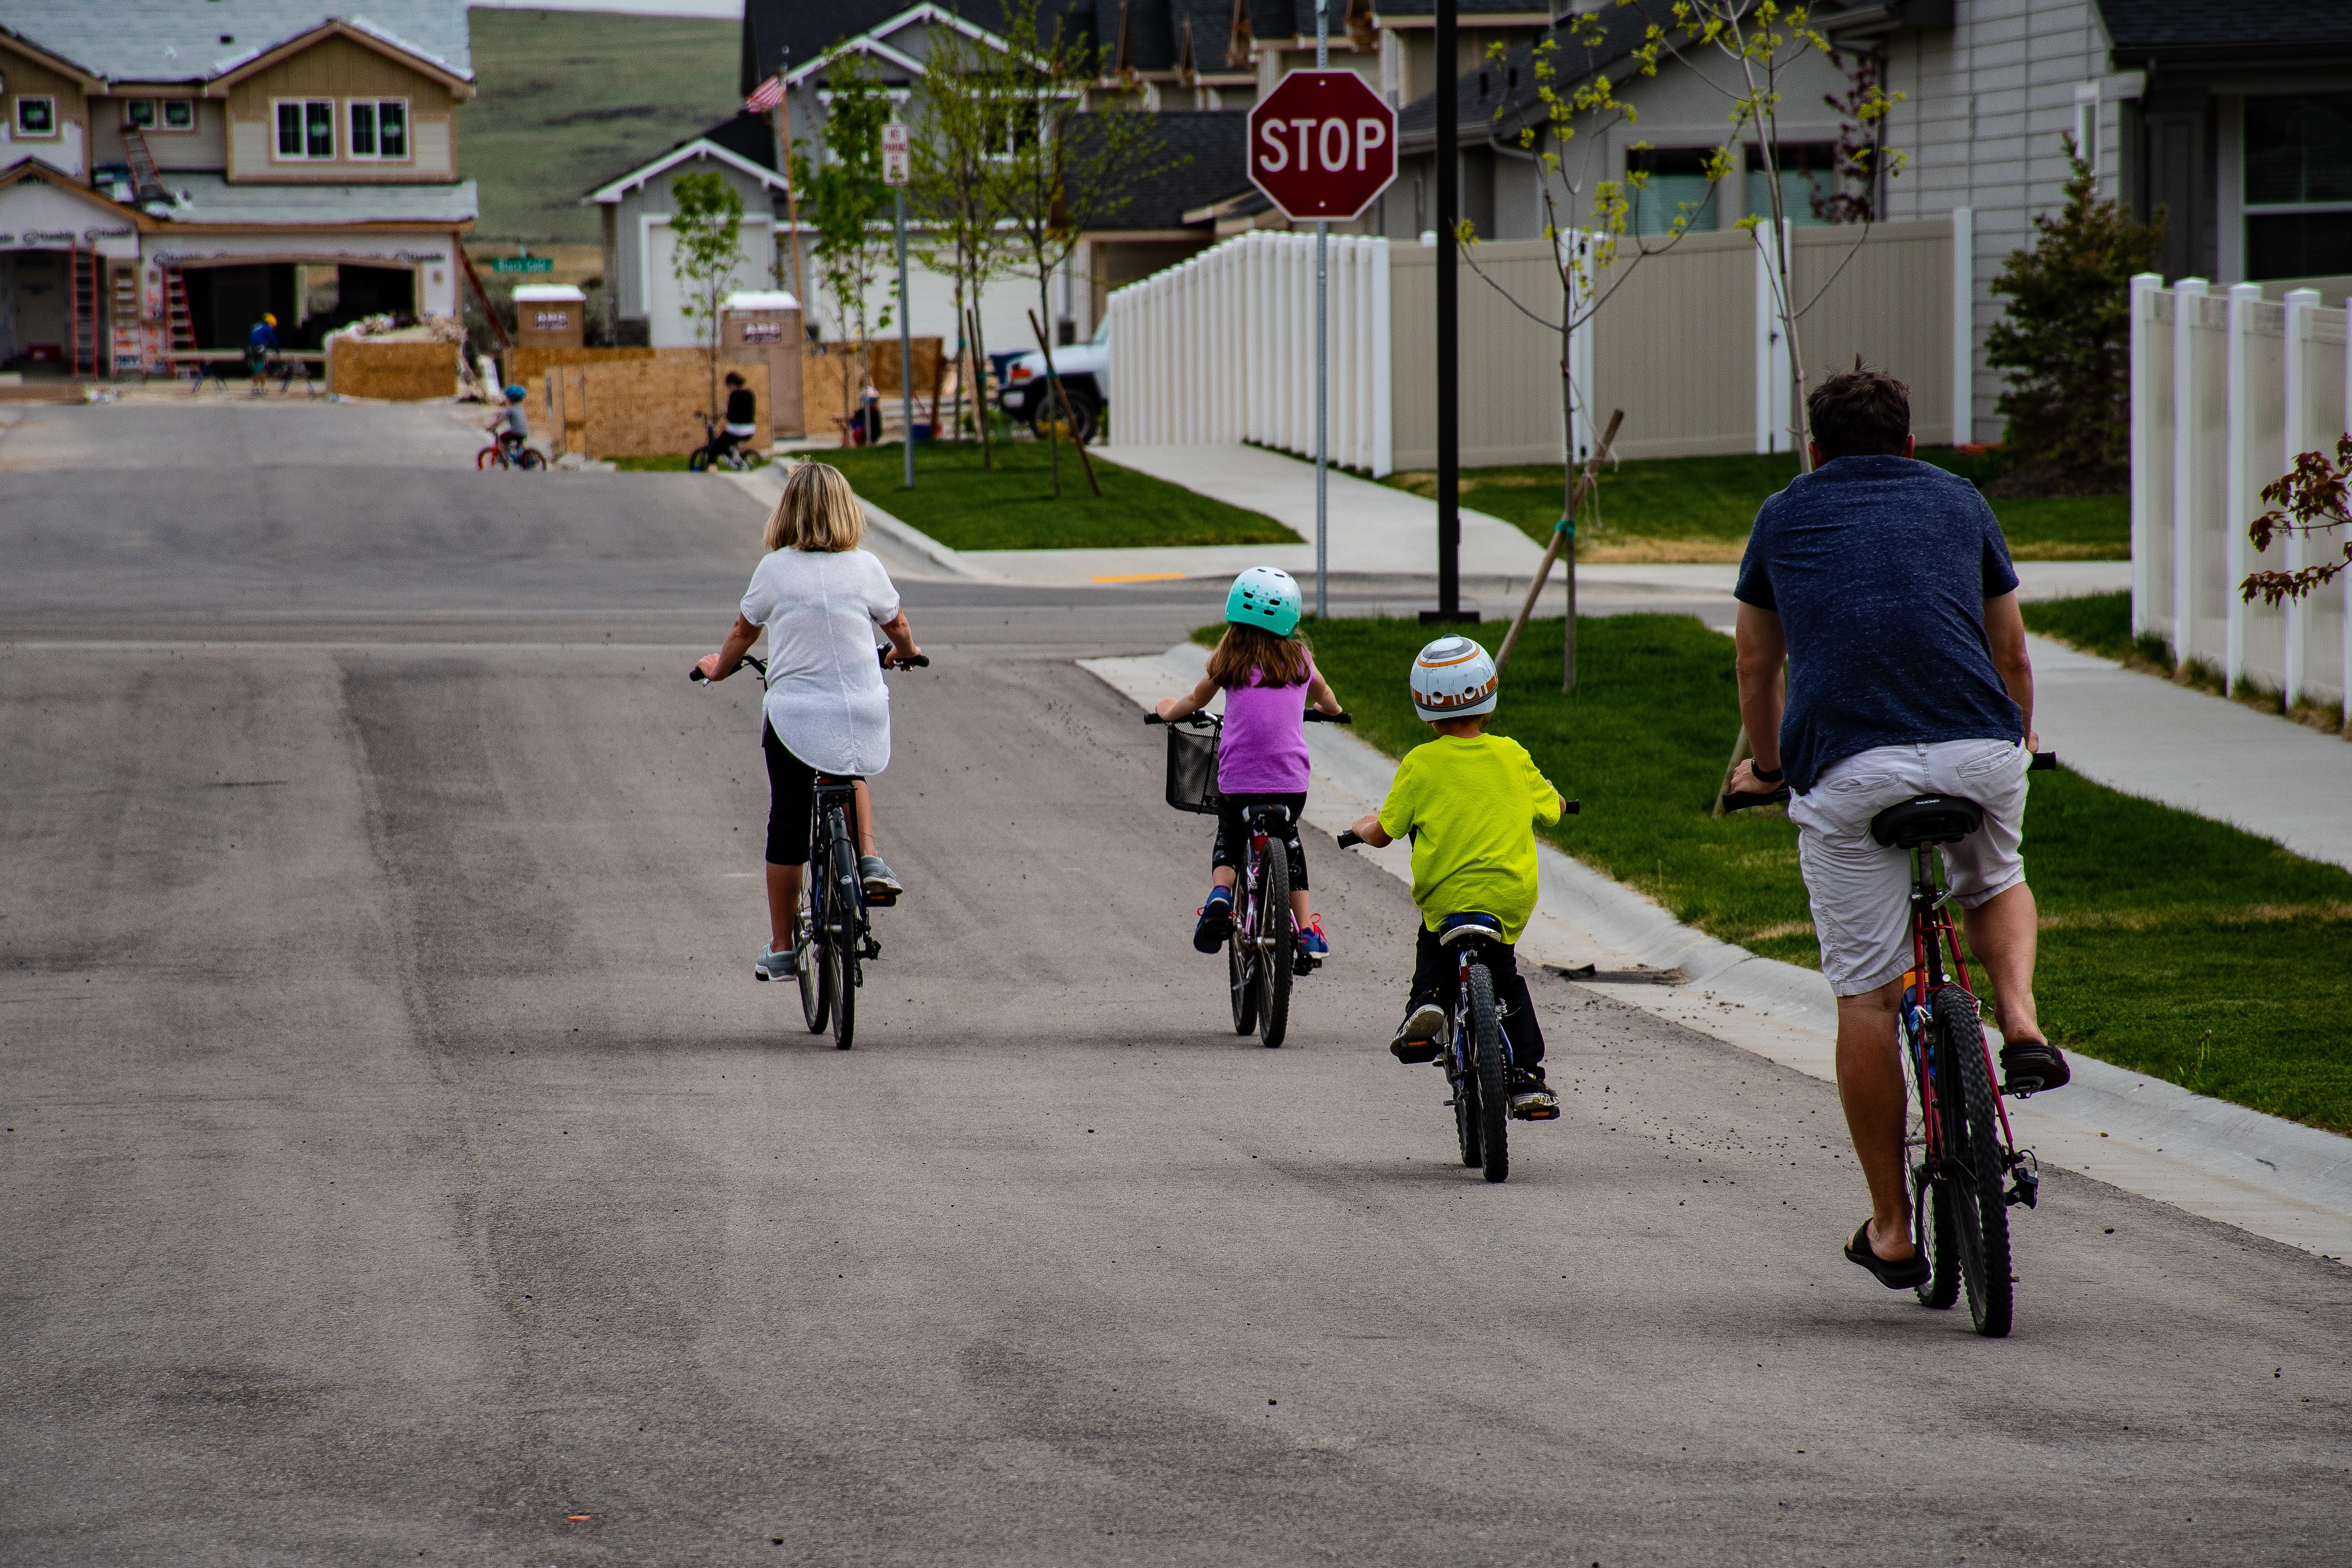 family-riding-on-bicycle-1073133.jpg